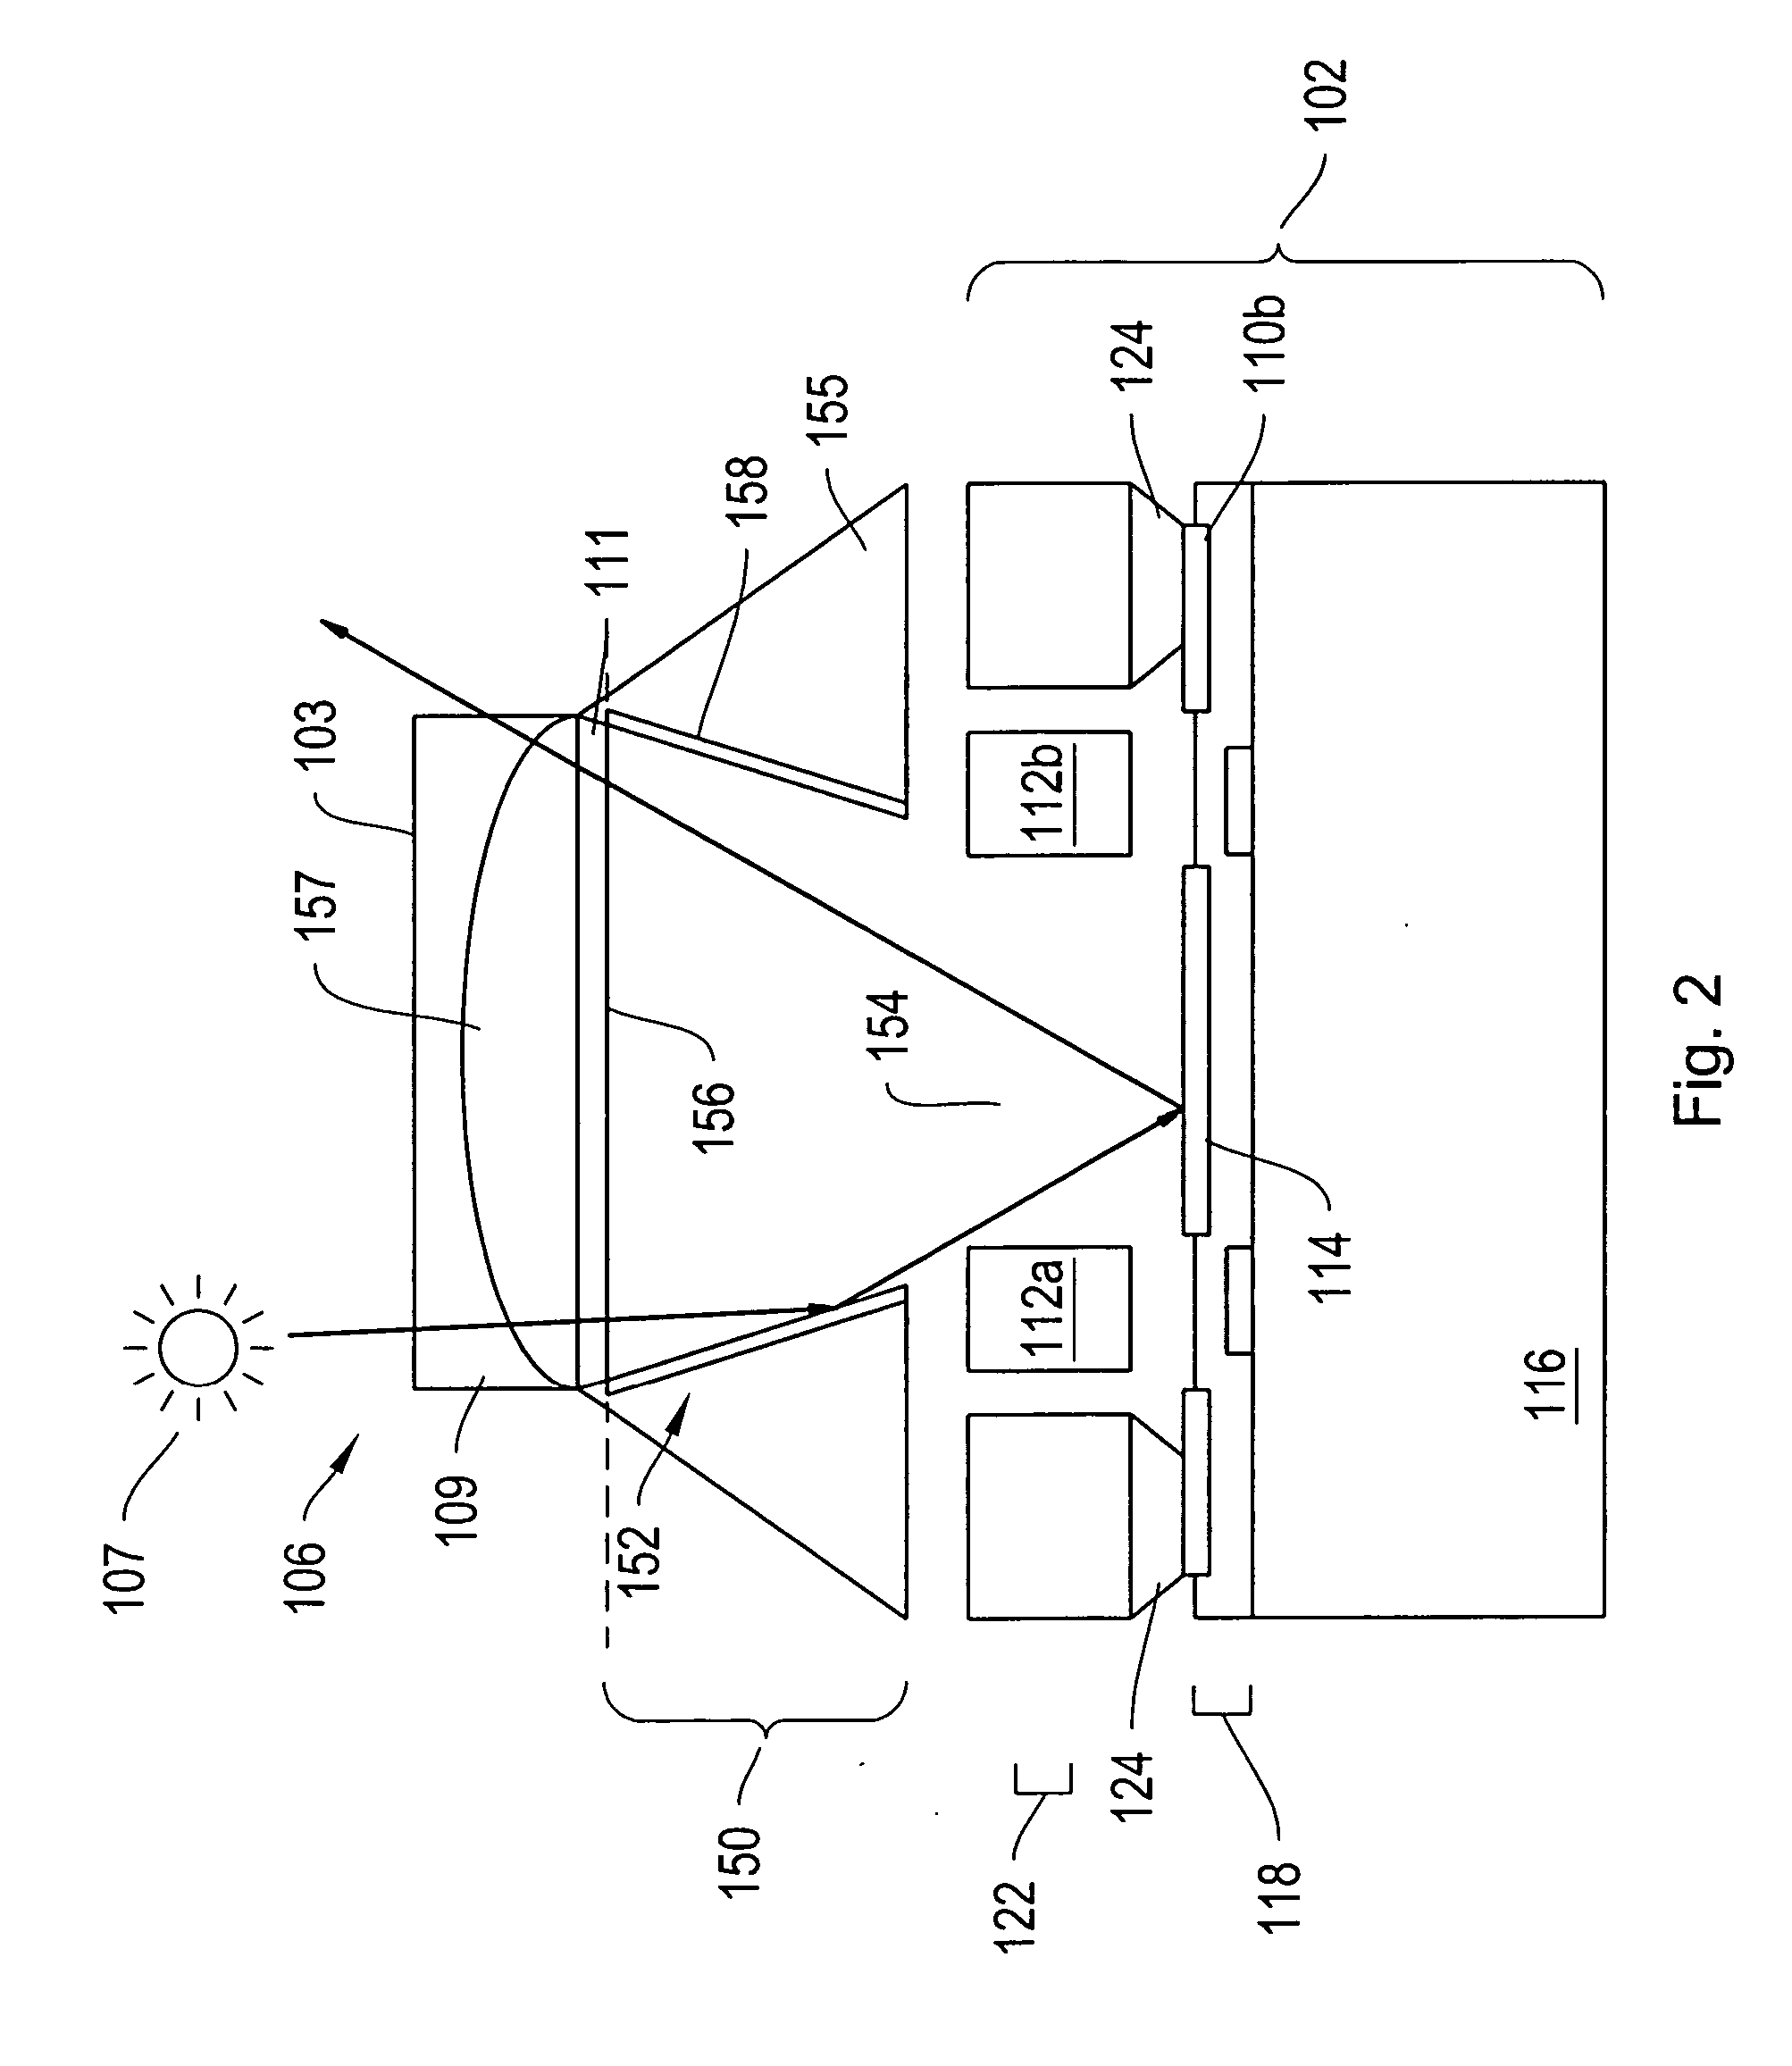 Light concentrating reflective display methods and apparatus